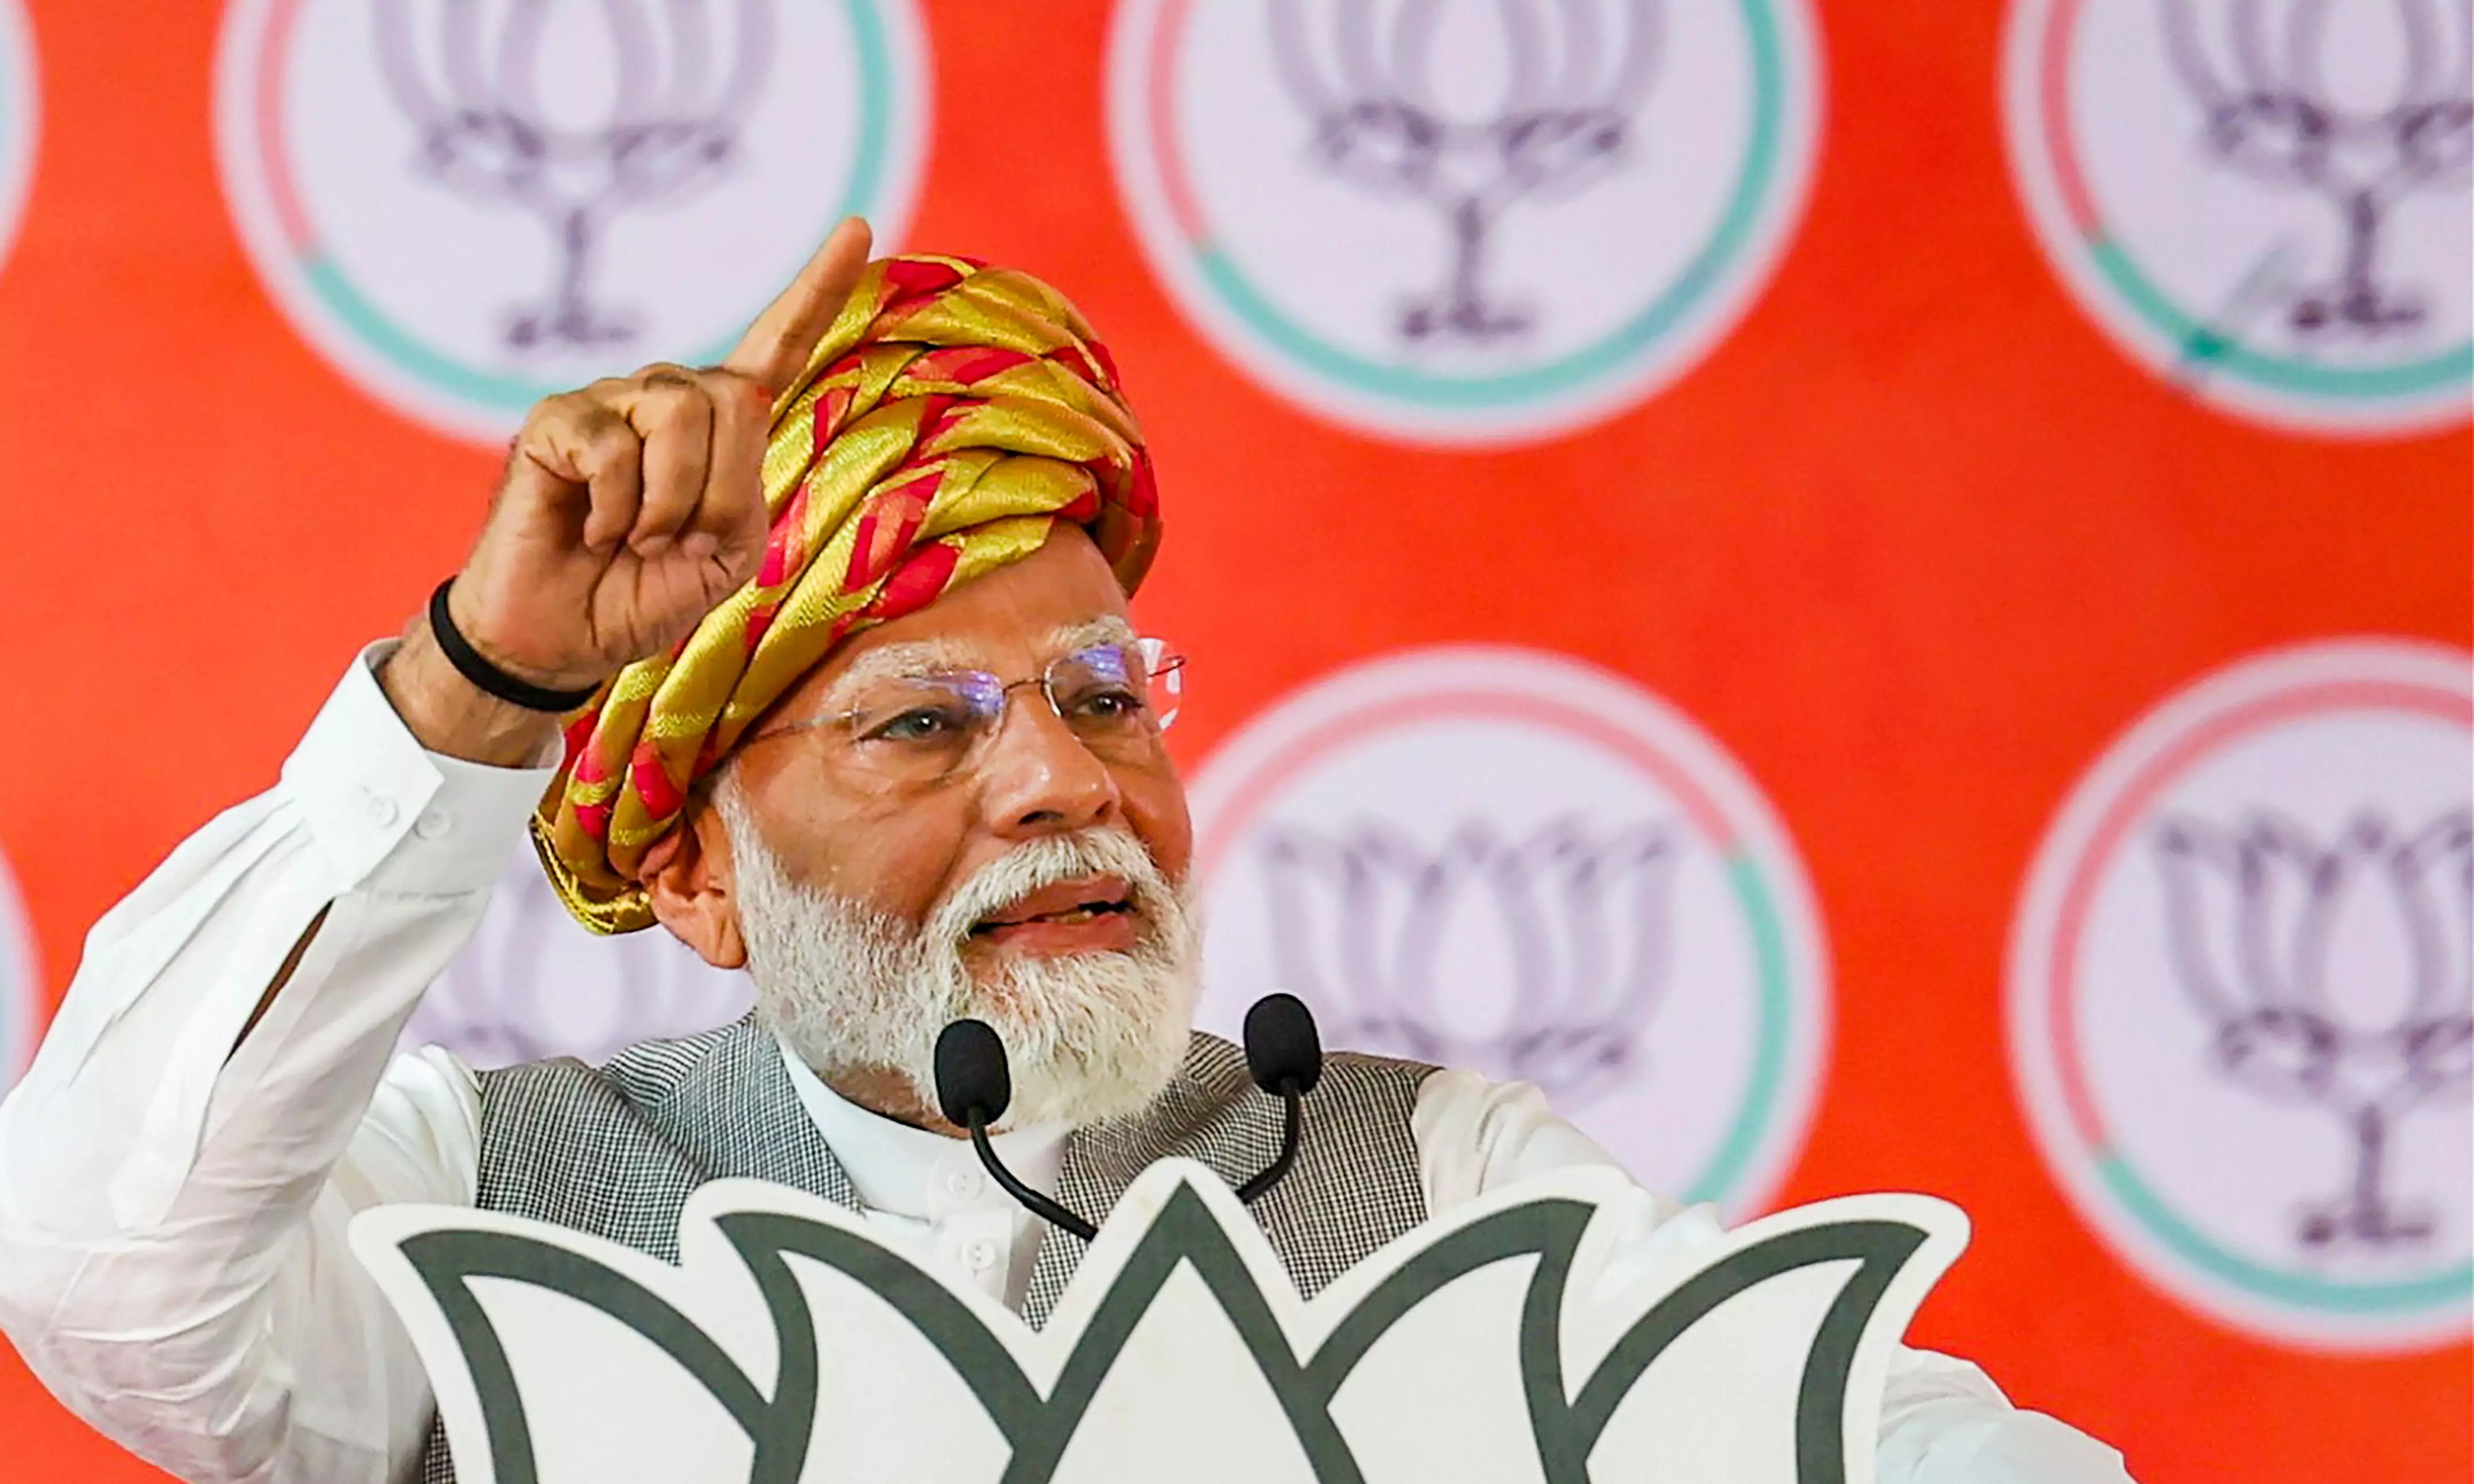 Congress is insulting and dividing people based on skin colour, says Modi